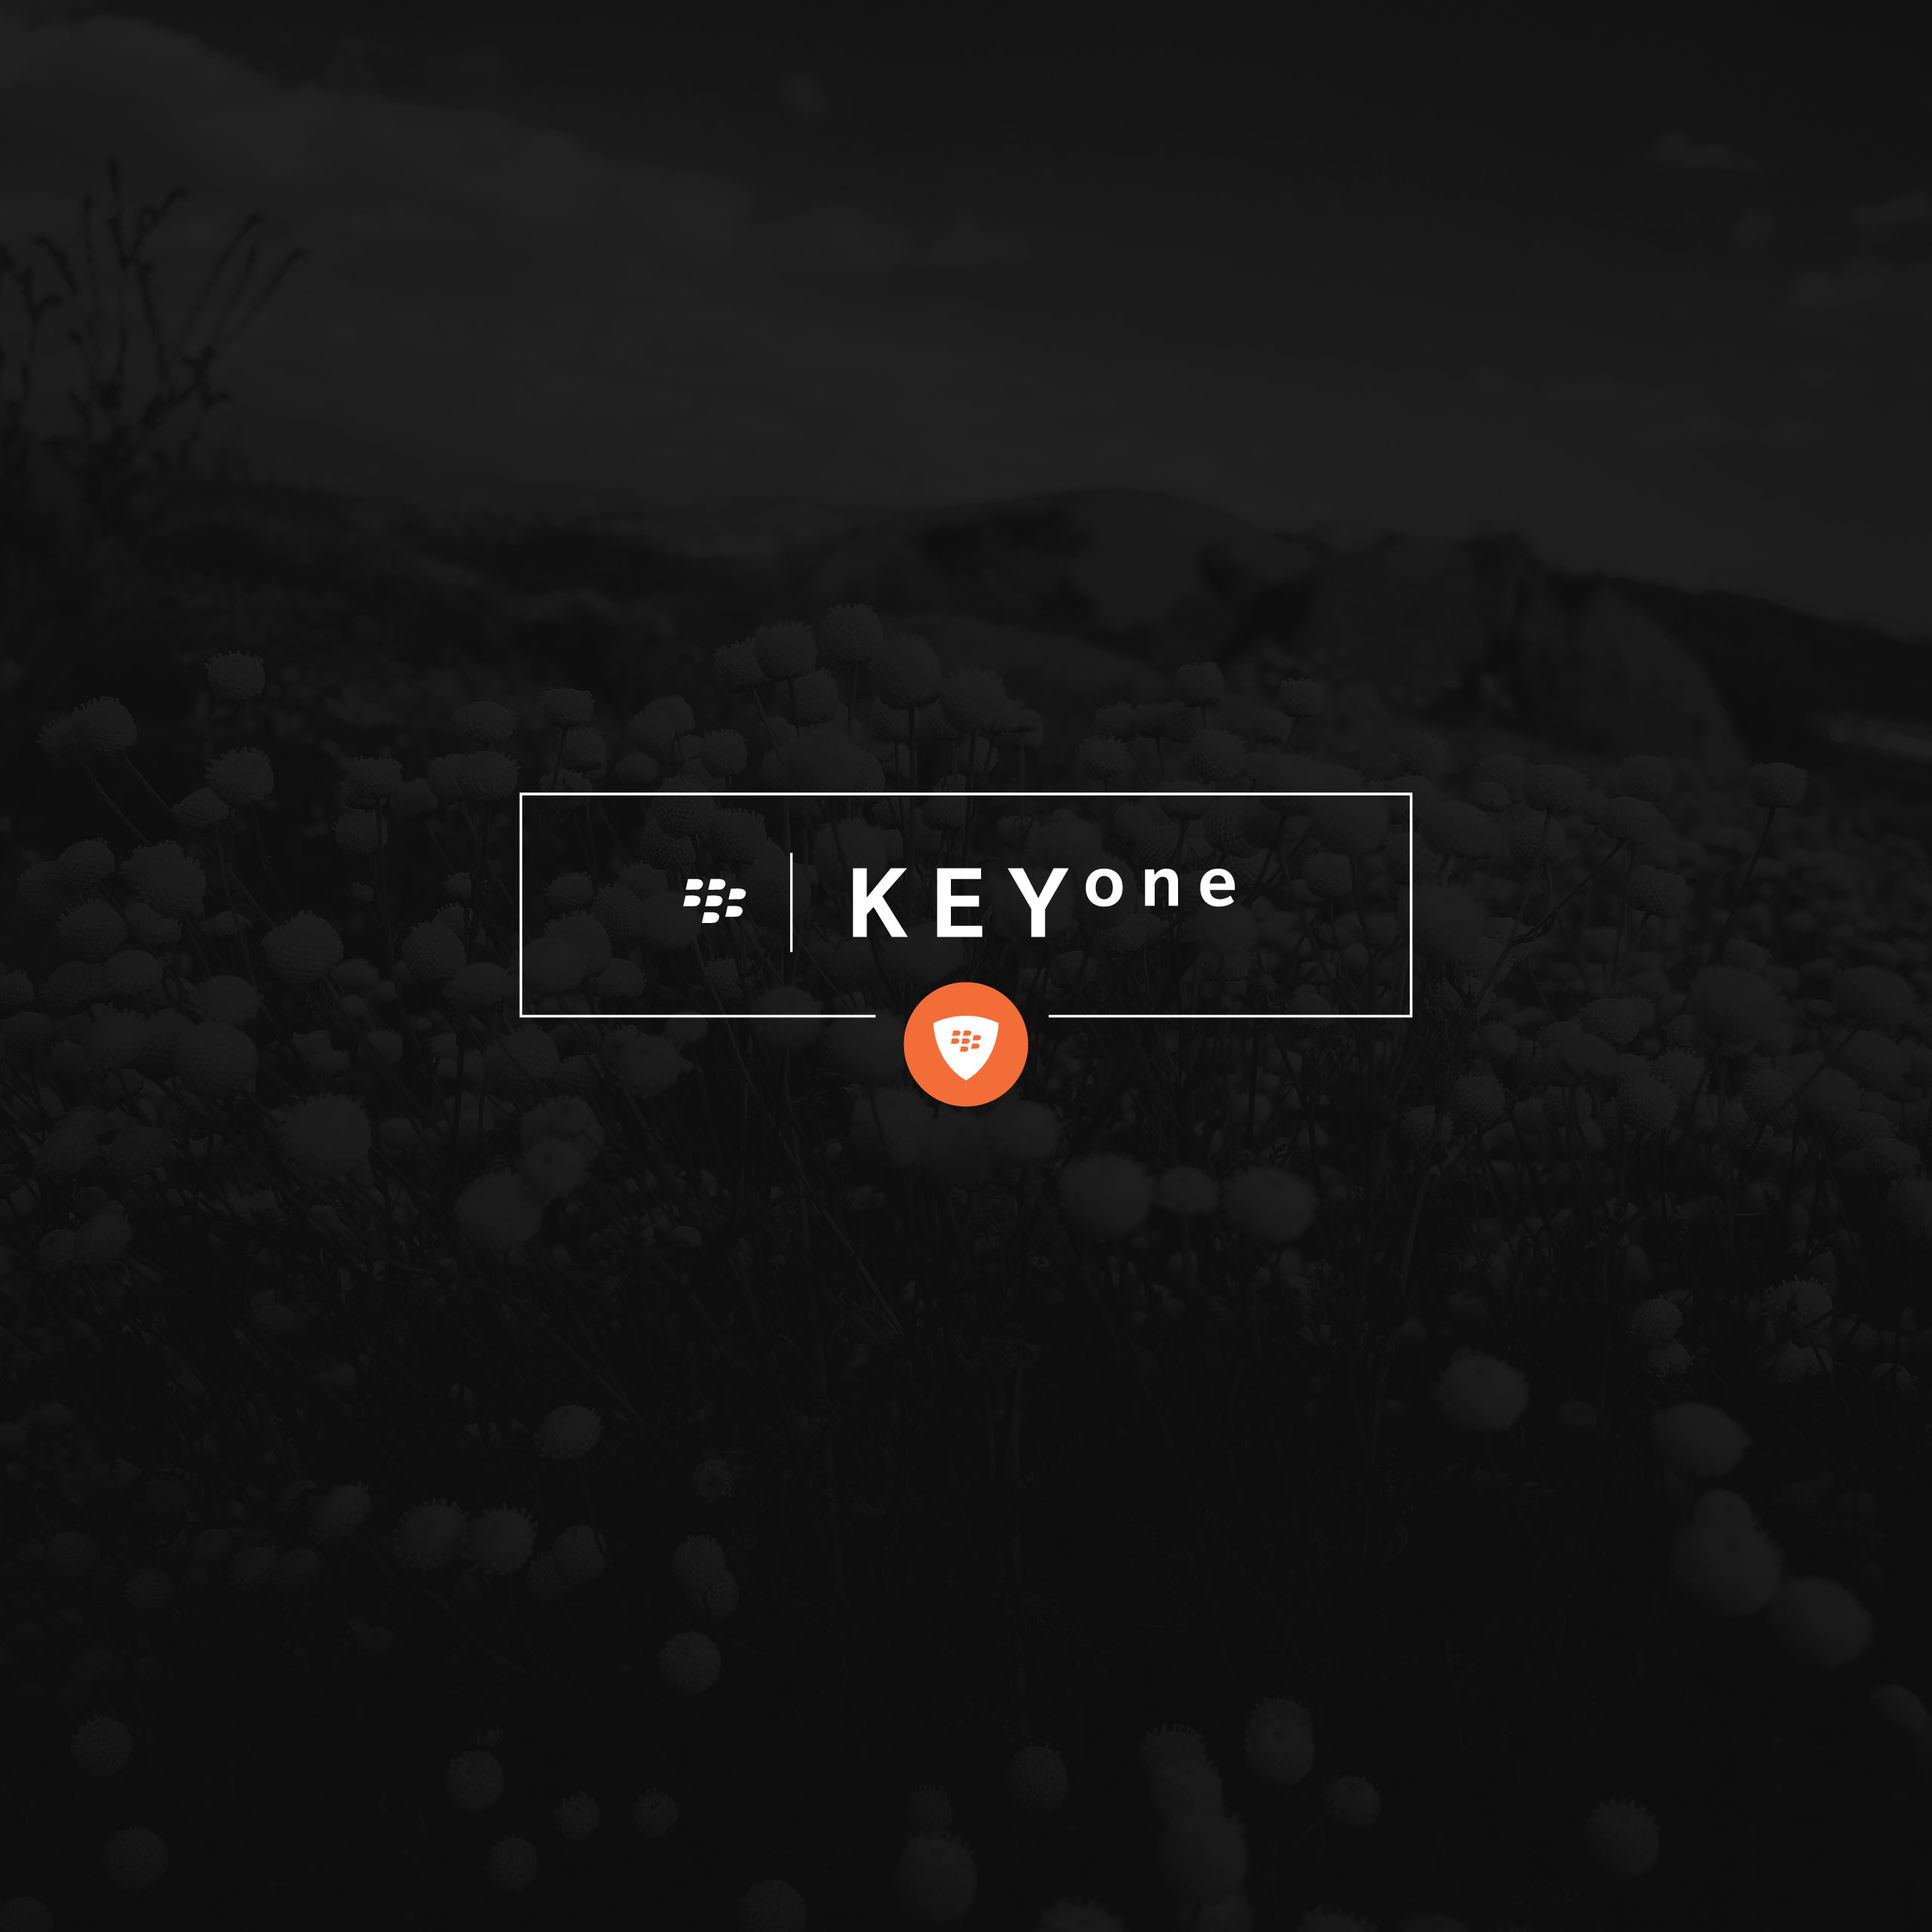 🔥 Free Download Keyone Pootermobile Crackberry Album On Imgur [2560x2560] For Your Desktop